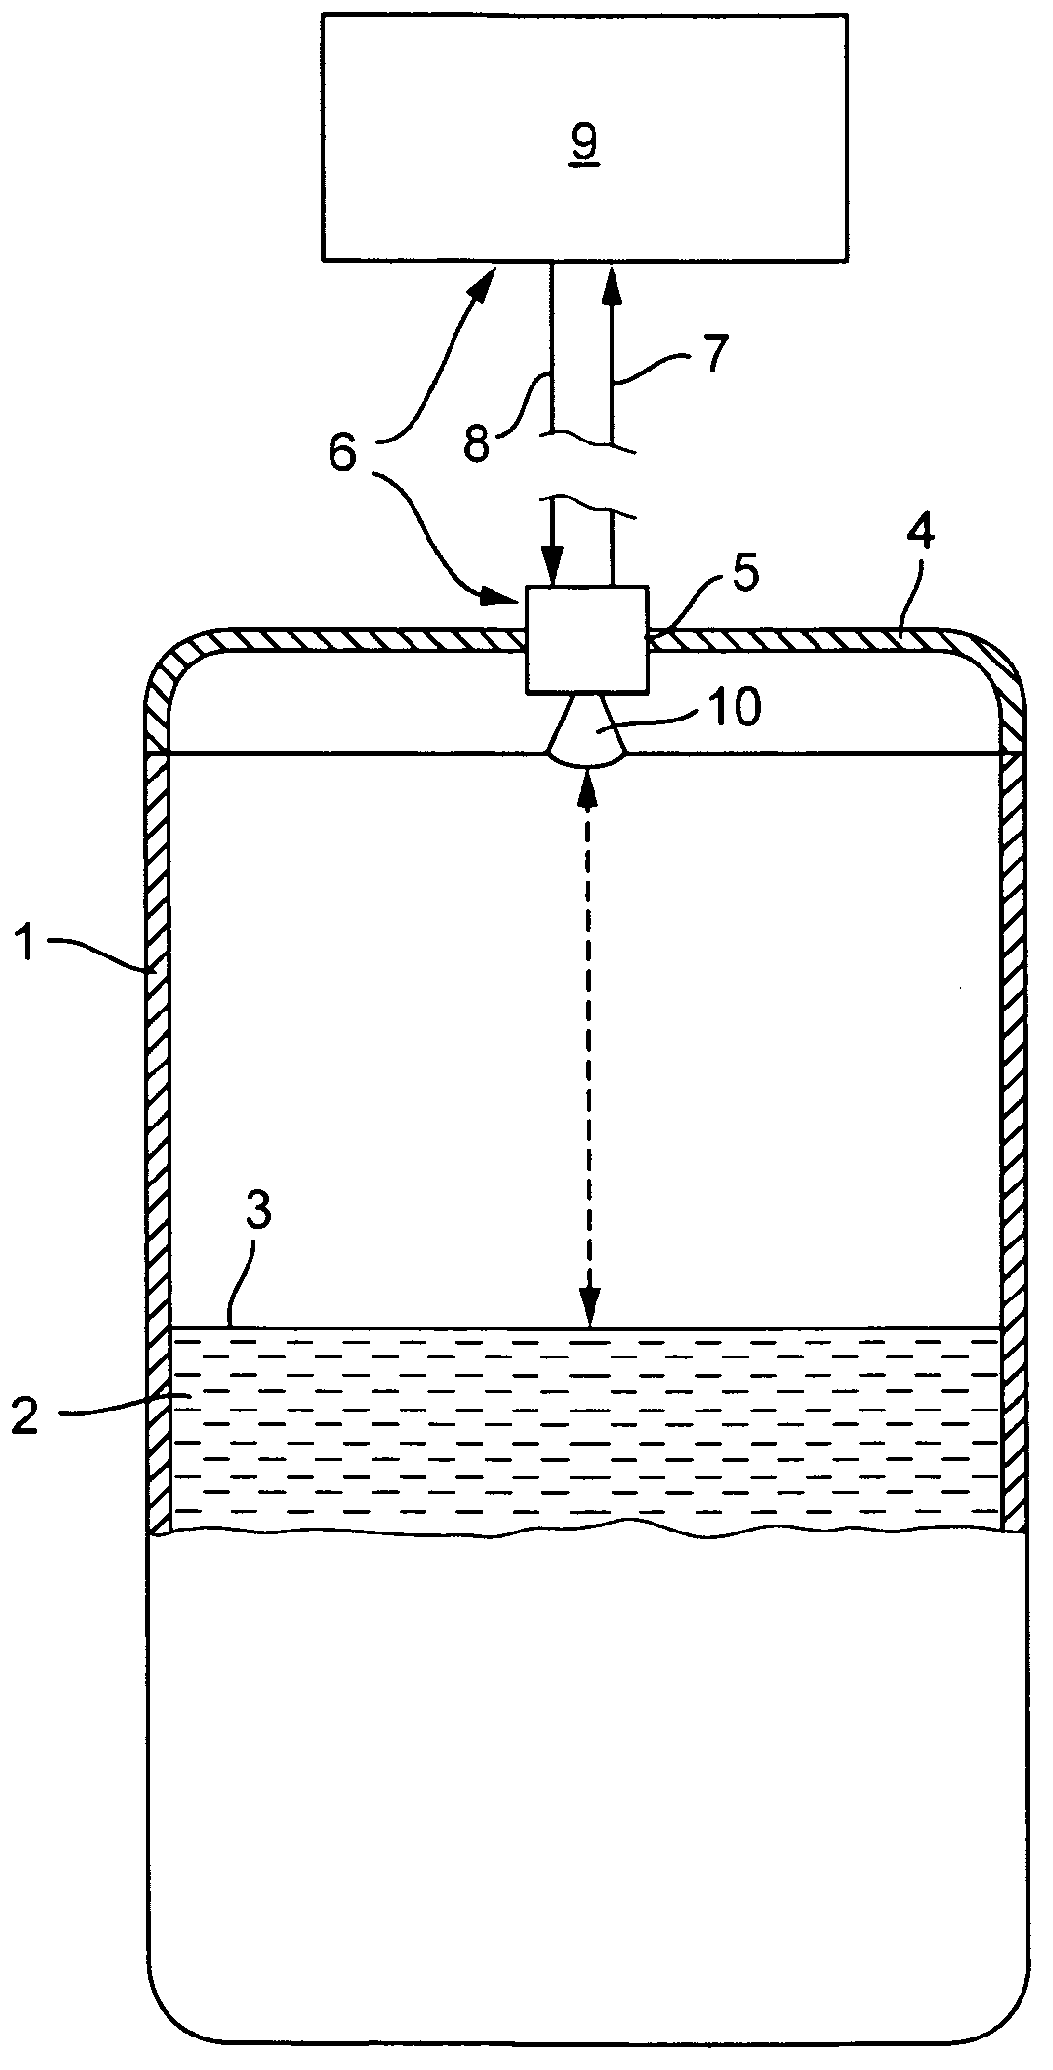 Electrical or electronic safety module